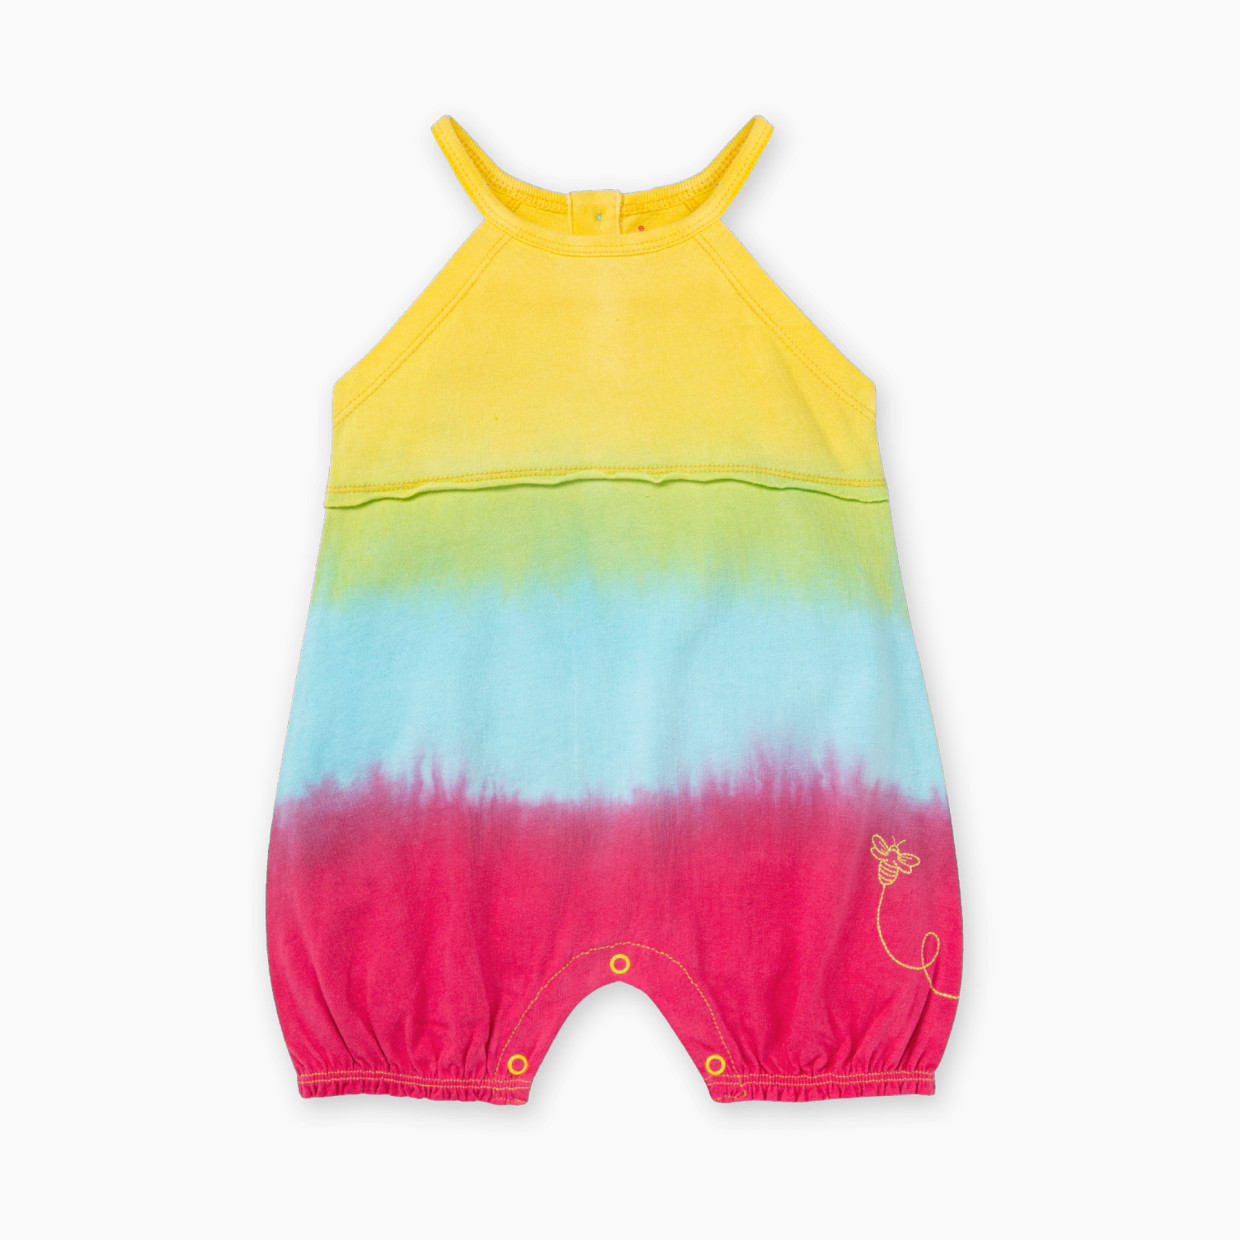 Burt's Bees Baby Organic Cotton Romper Jumpsuit - Pineapple Dip Dyed, 0-3 Months.